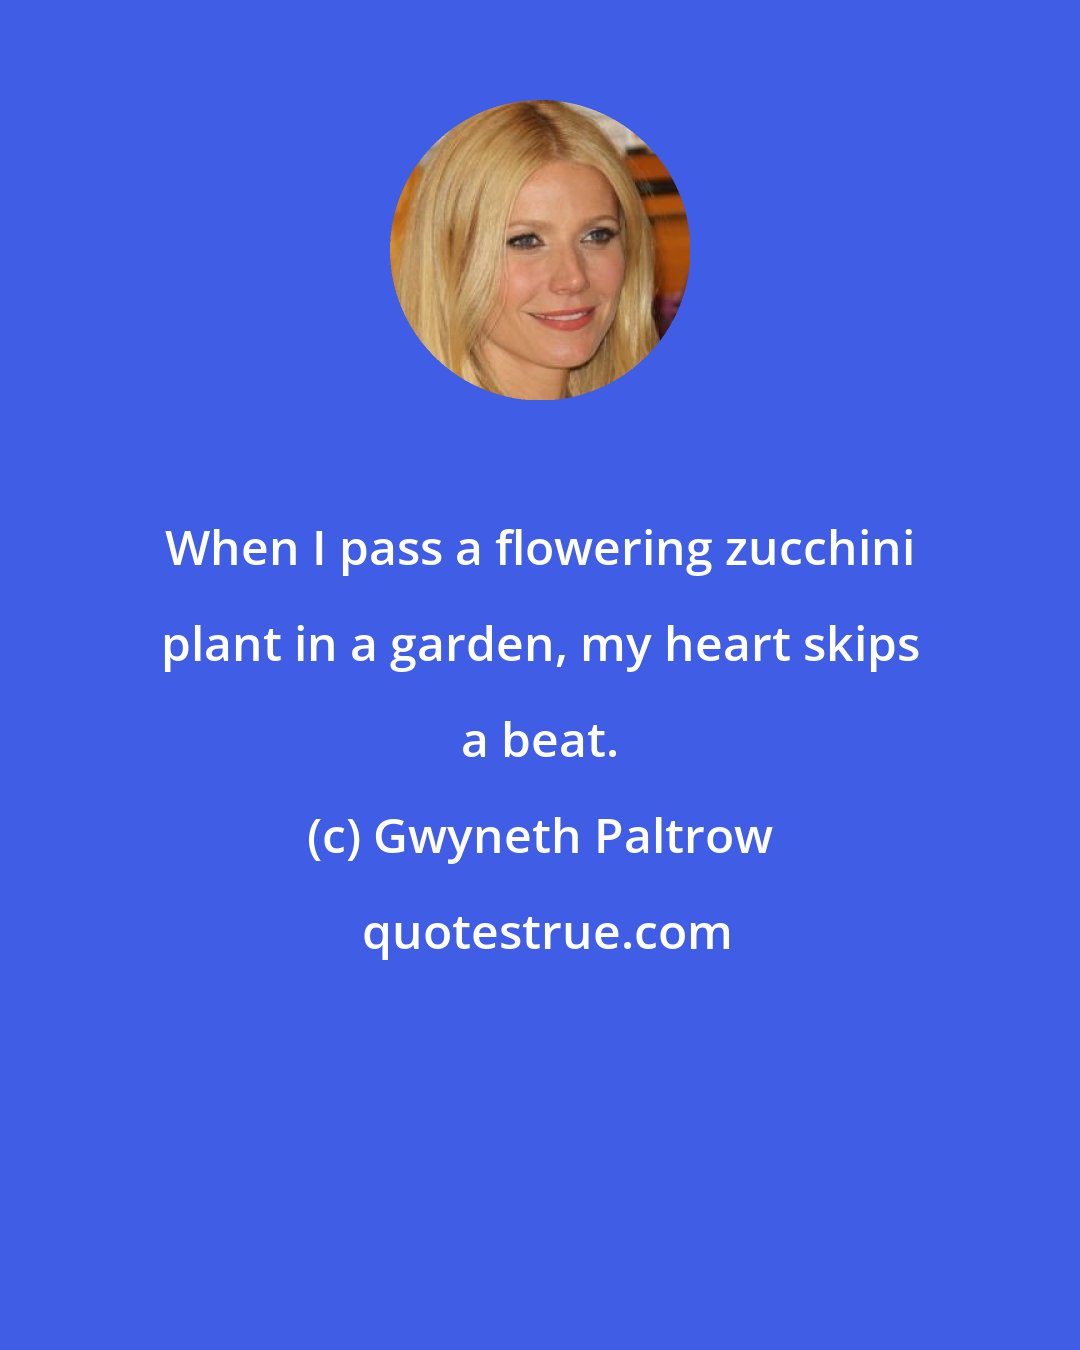 Gwyneth Paltrow: When I pass a flowering zucchini plant in a garden, my heart skips a beat.